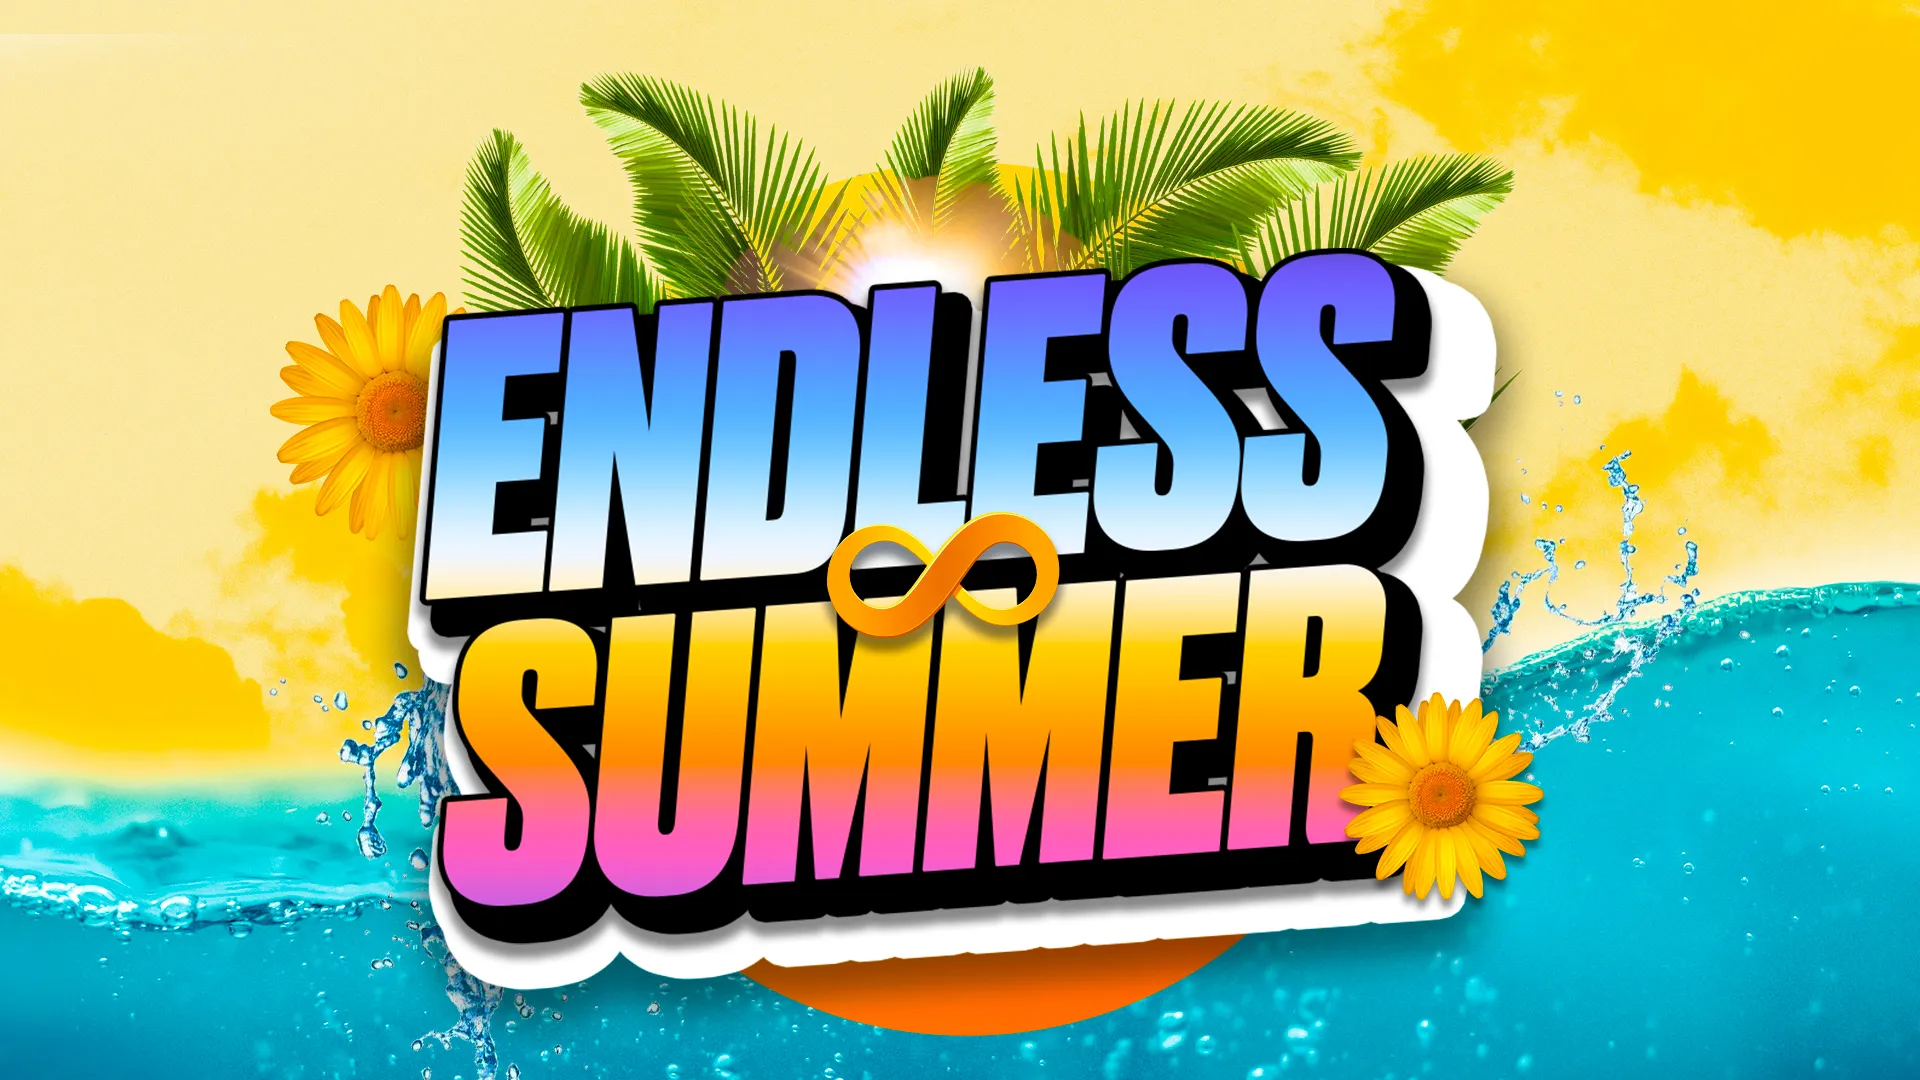 The "Endless Summer" church media template is bright and lively, capturing the essence of summer with its vibrant colors and energetic design. Ideal for promoting summer events, it brings a sense of fun and excitement, perfect for youth and community gatherings.